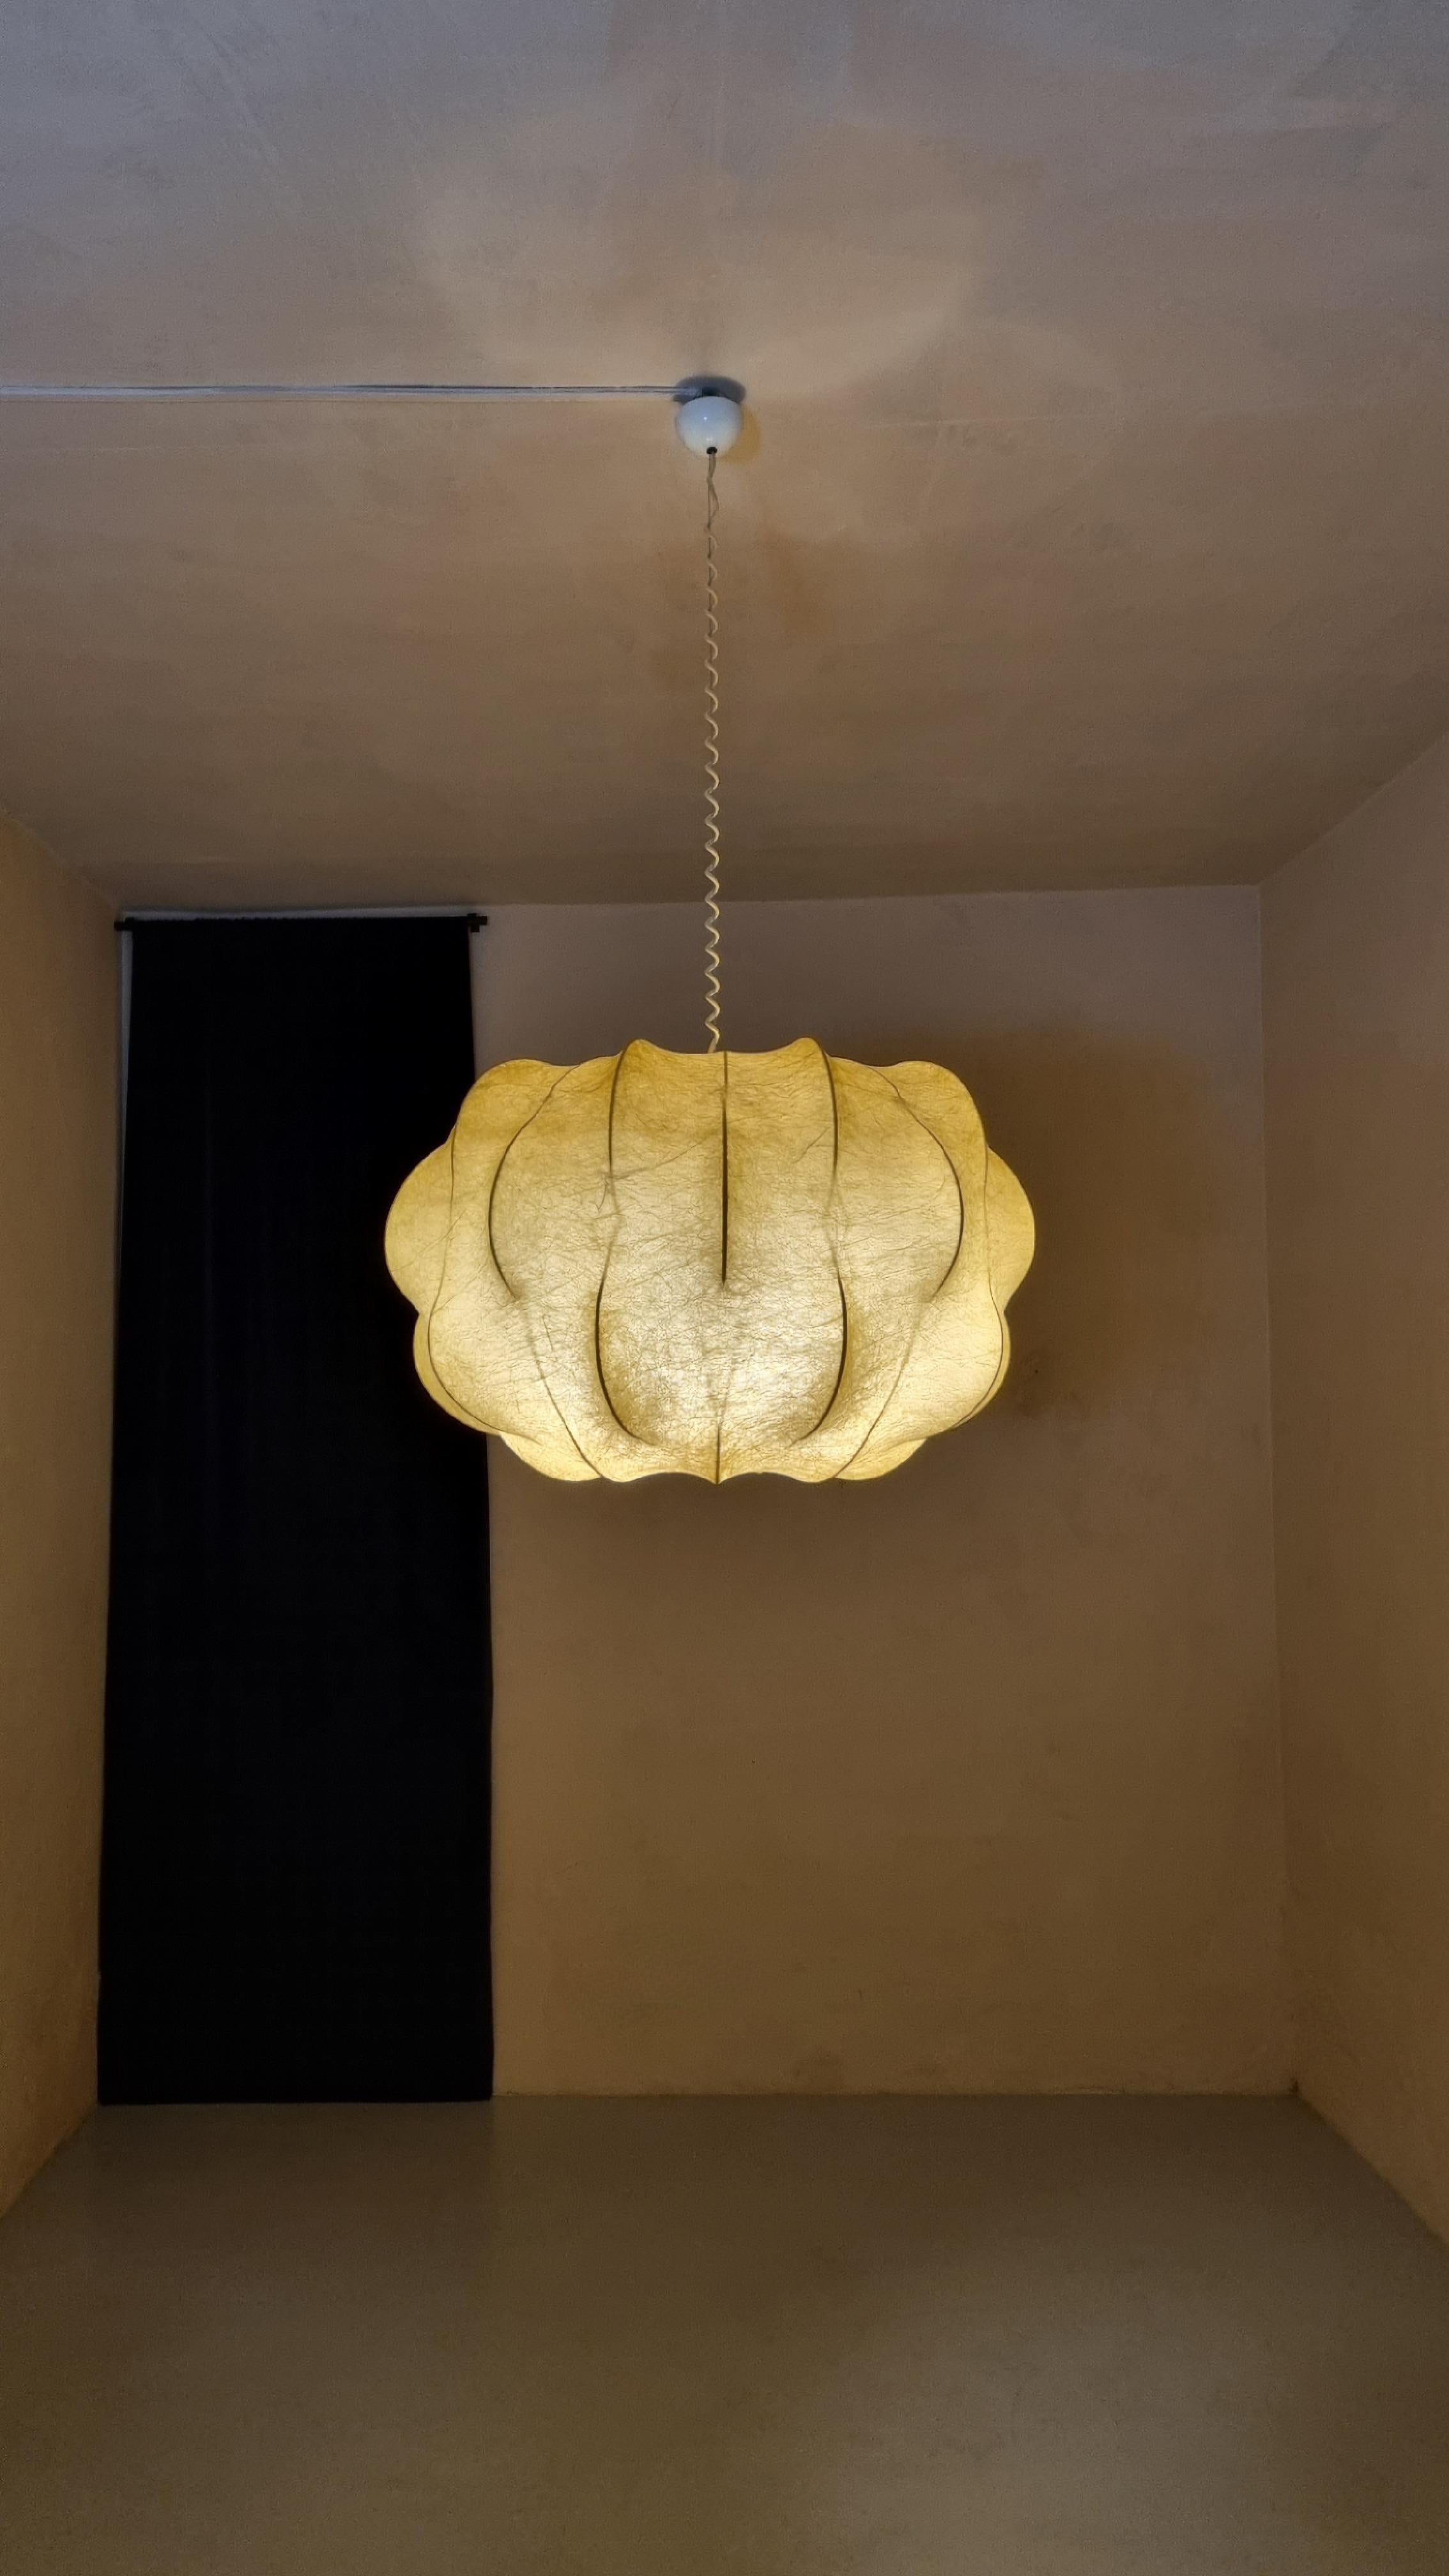 Mid-Century Modern Nuvola ceiling lamp by Tobia Scarpa for Flos 1963